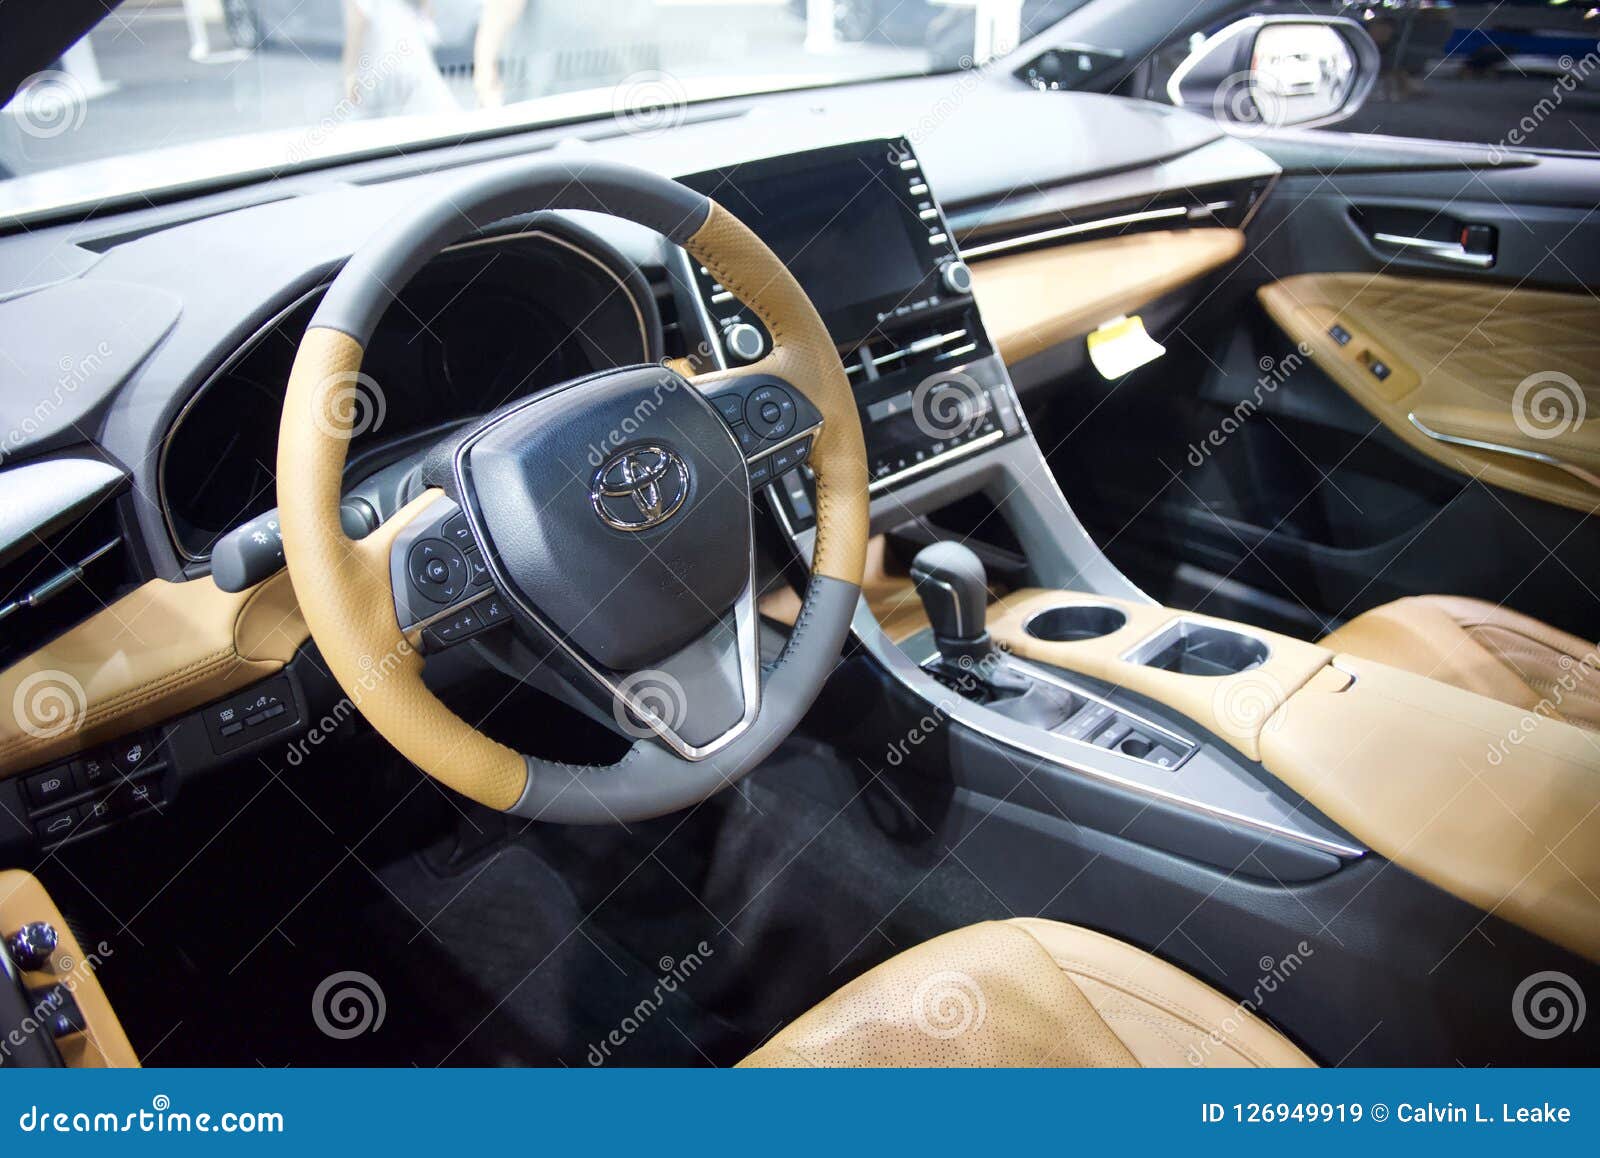 Toyota Car Interior With Leather Editorial Stock Image